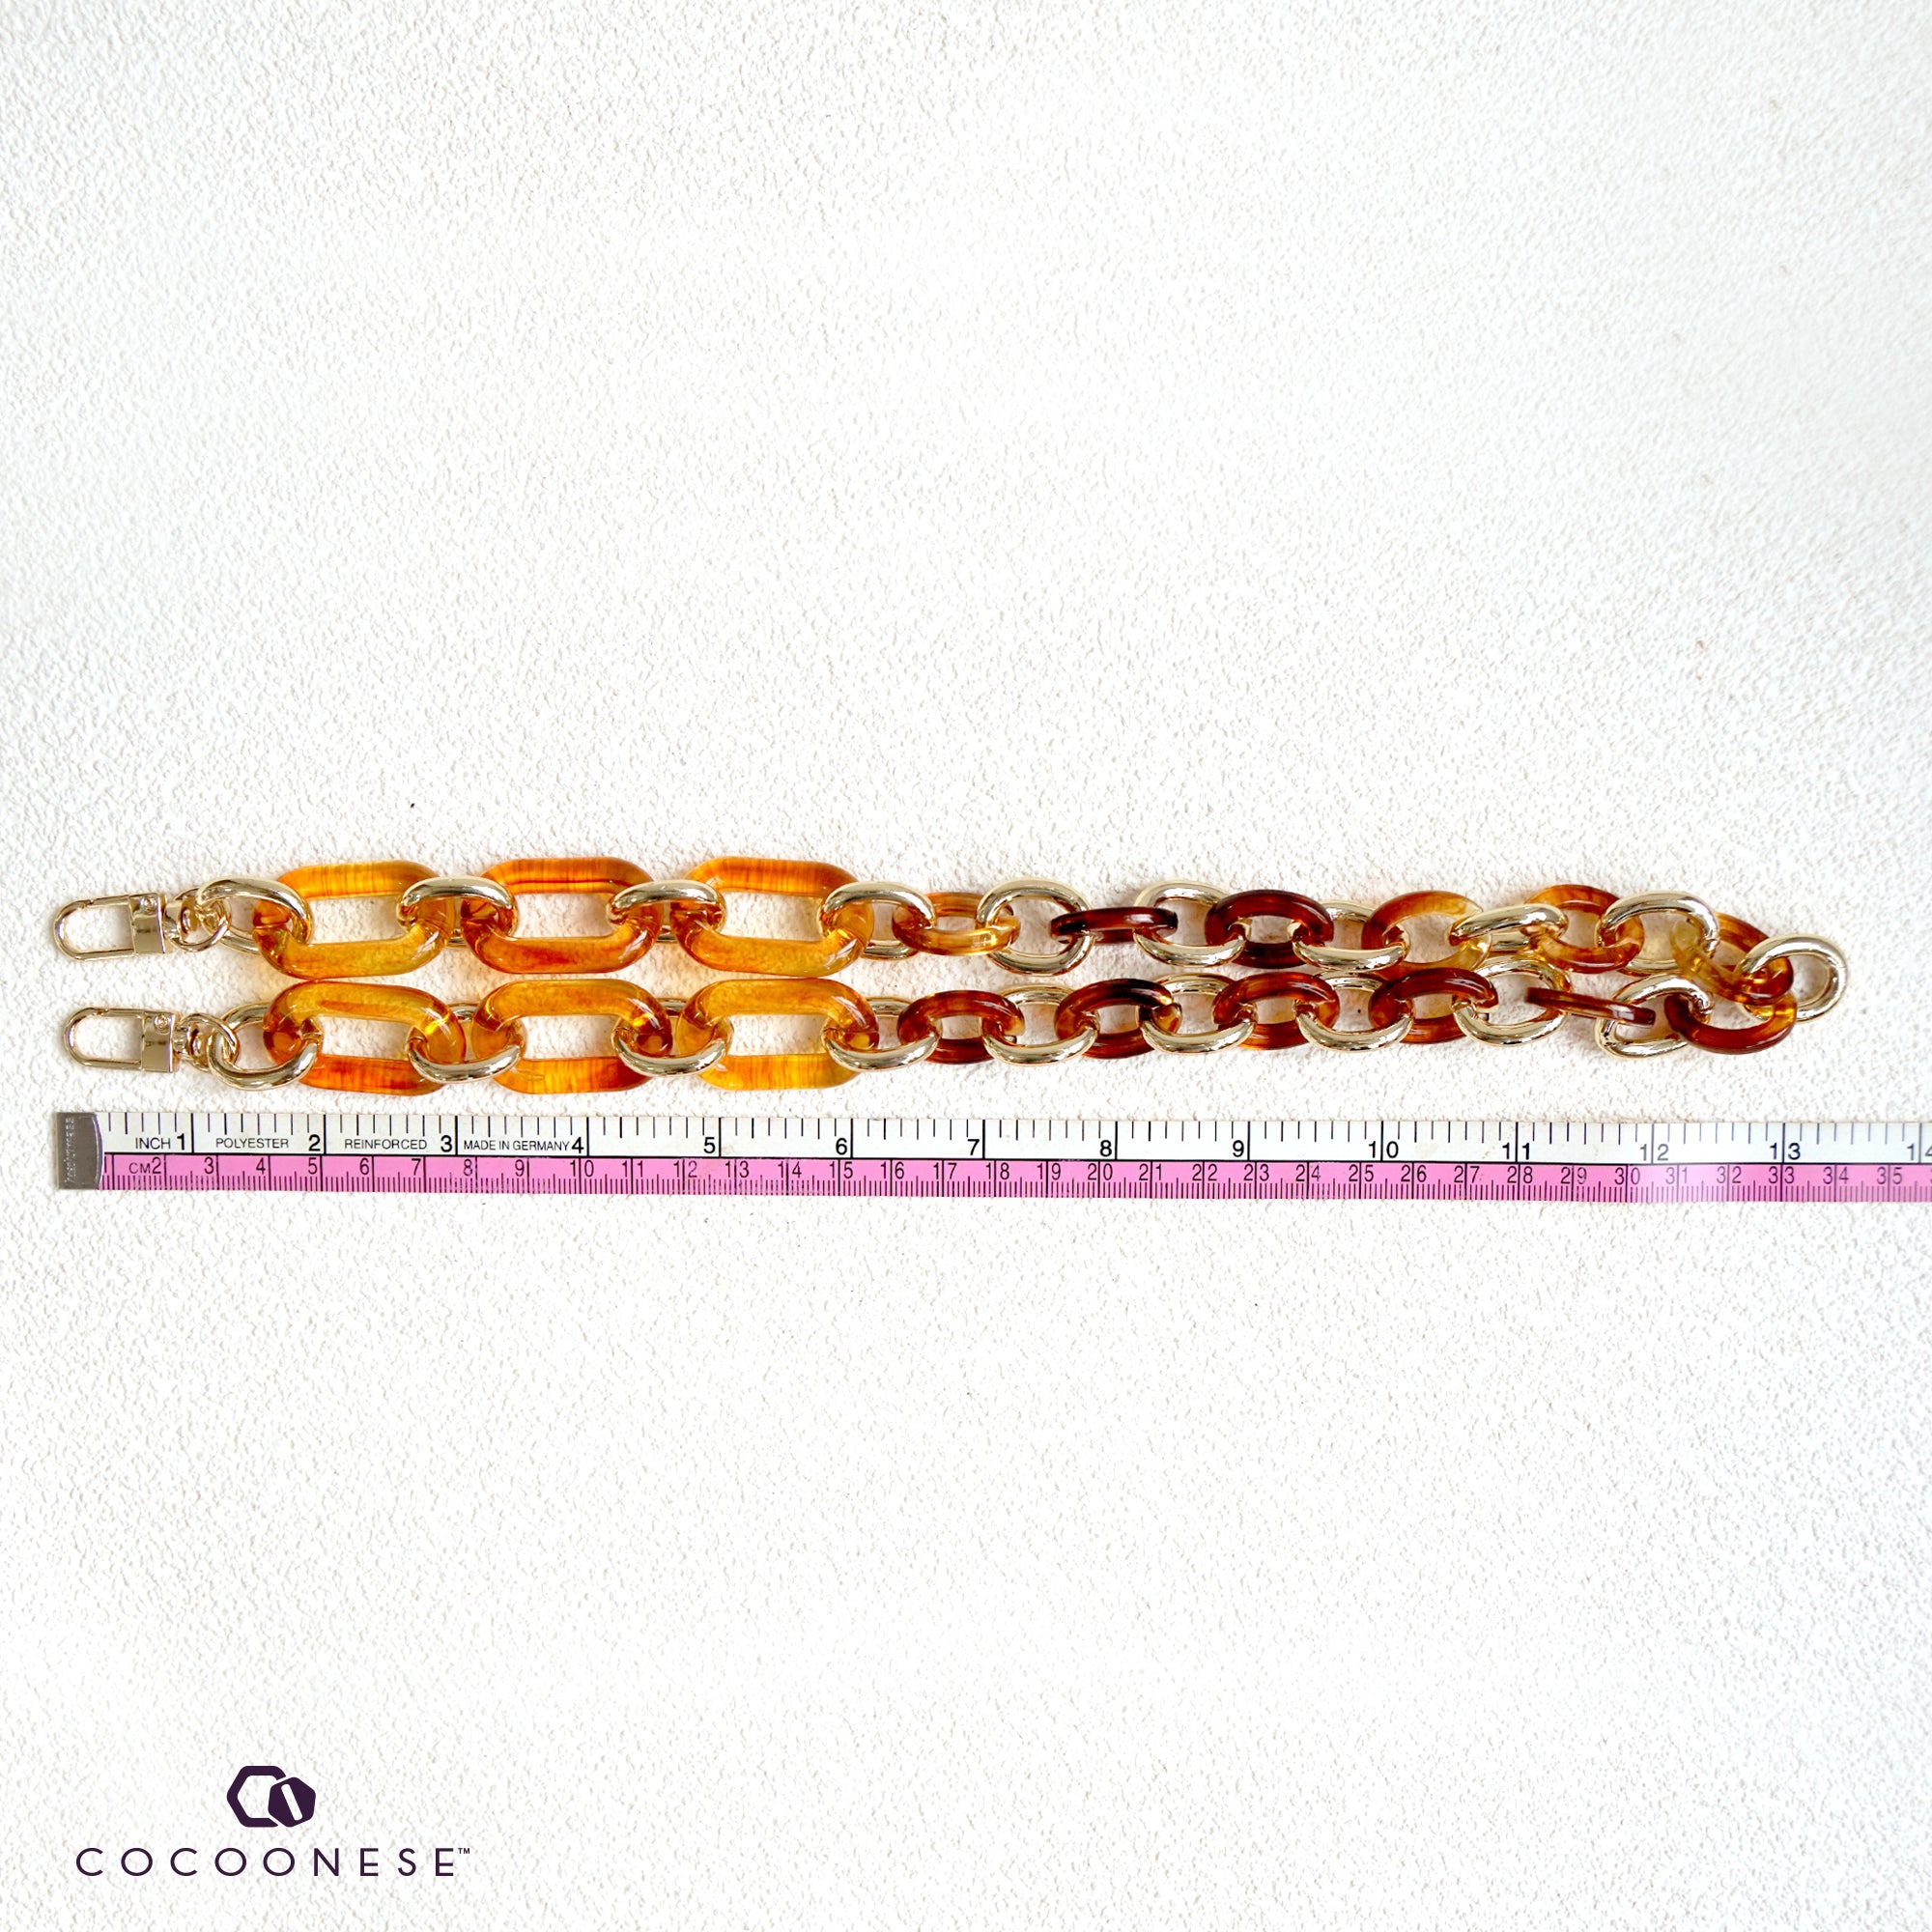 Acrylic Bag Chain Strap - Old fashioned